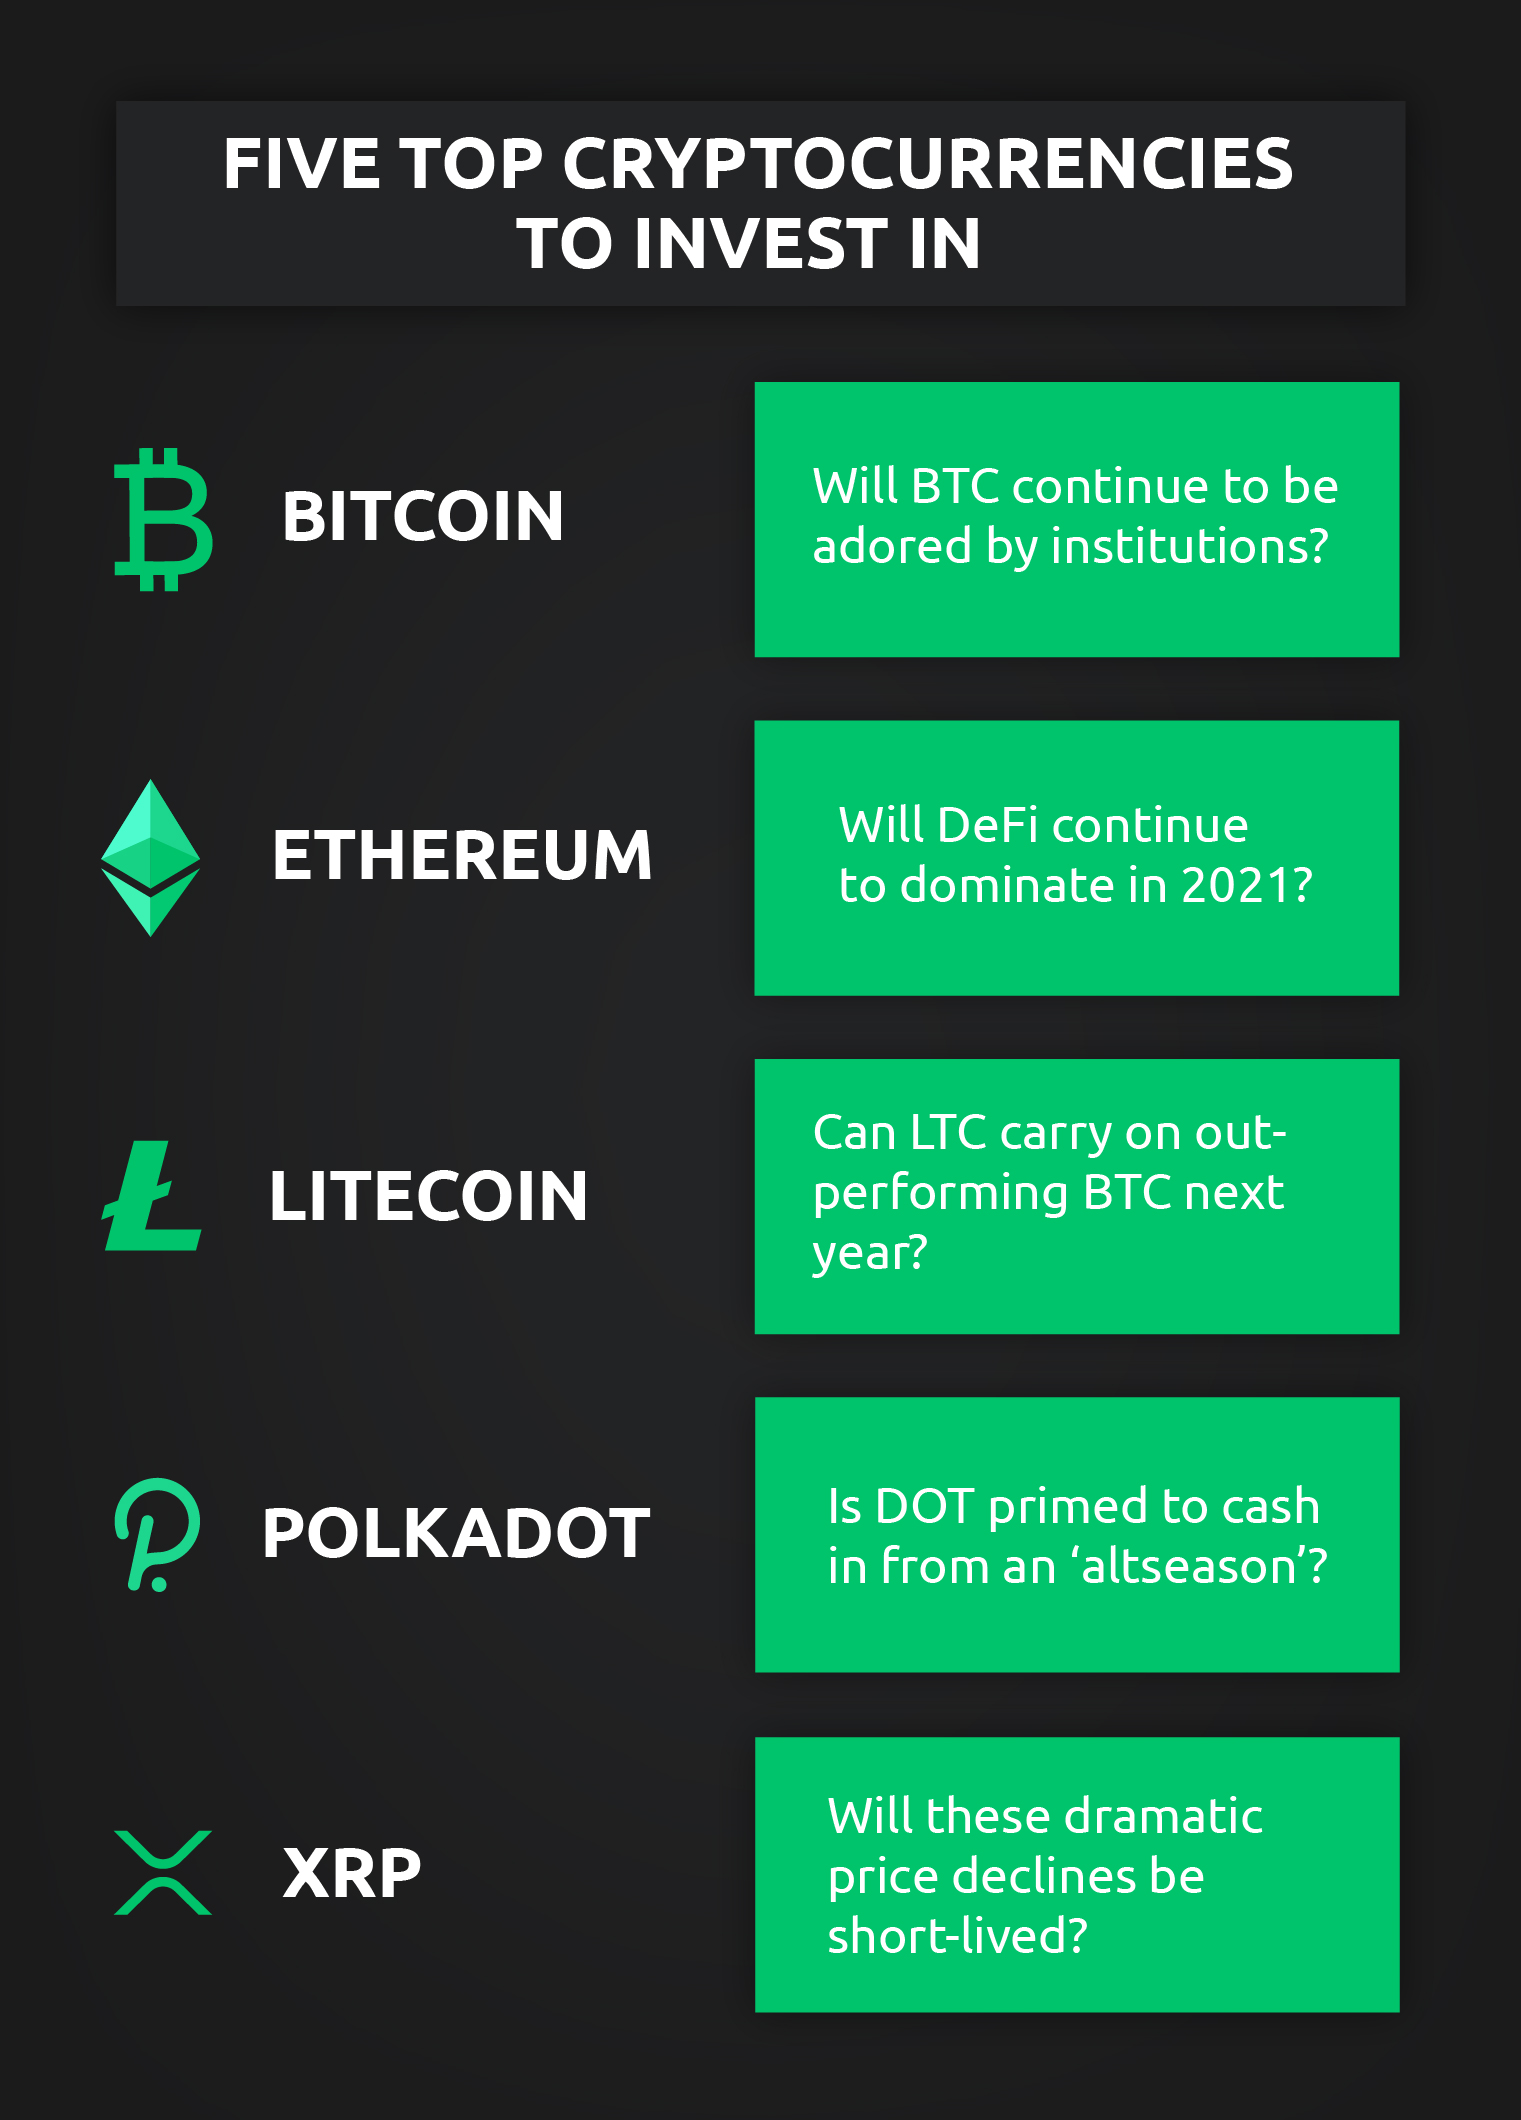 Ever Heard About Extreme Best Cryptocurrencies? Well About That...